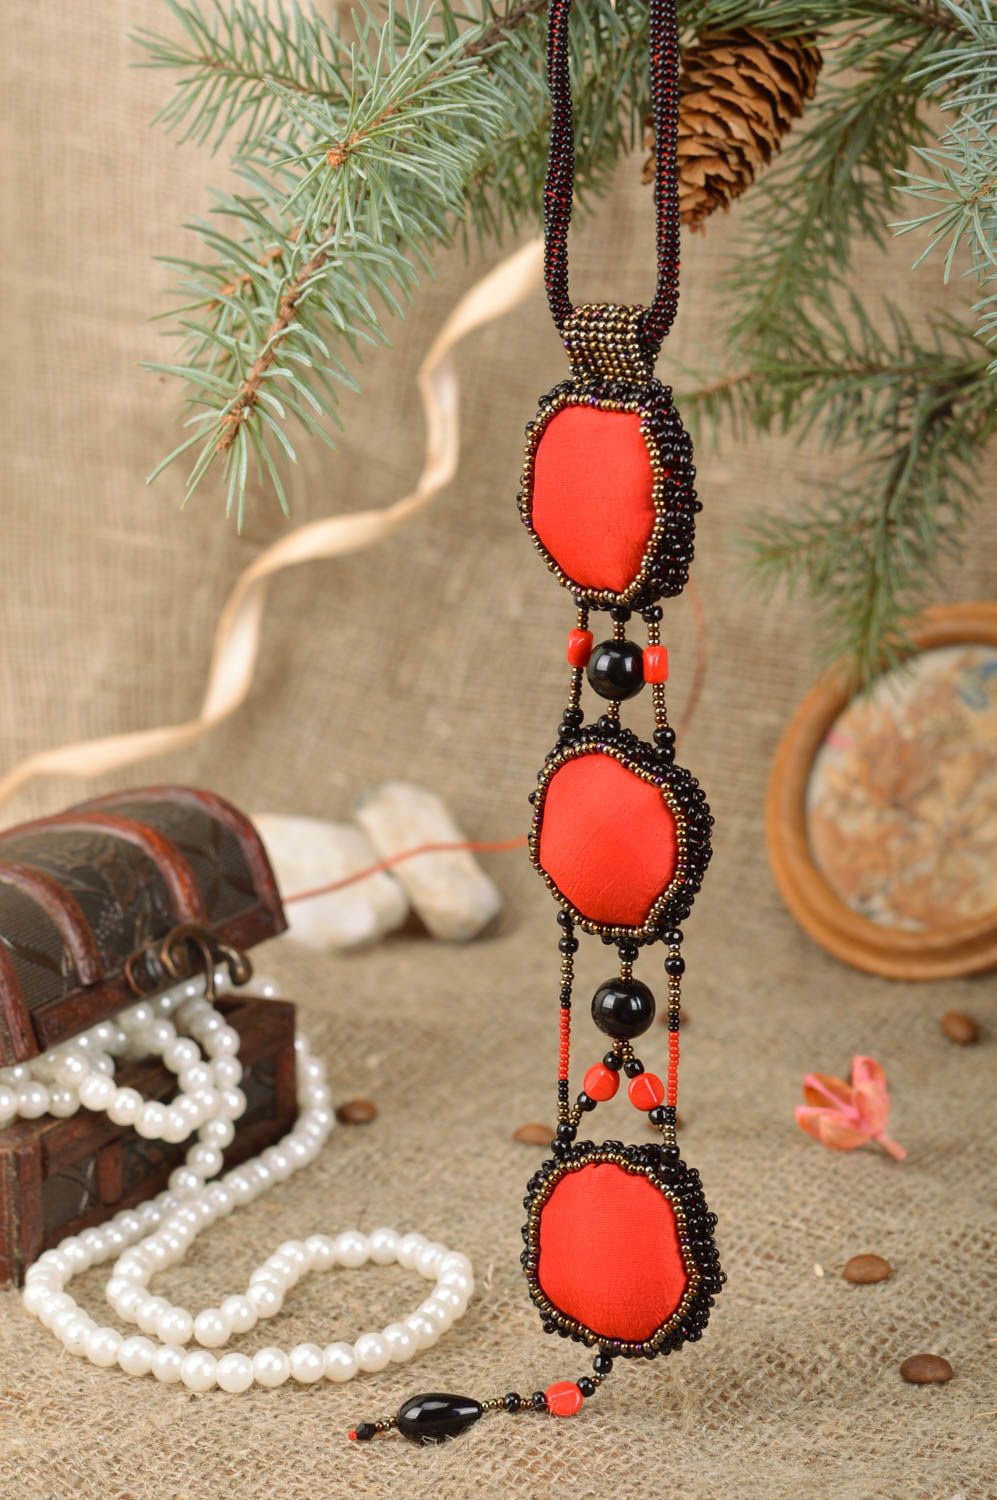 Beaded cord necklace with pendants on fabric basis sewn over with beads photo 5